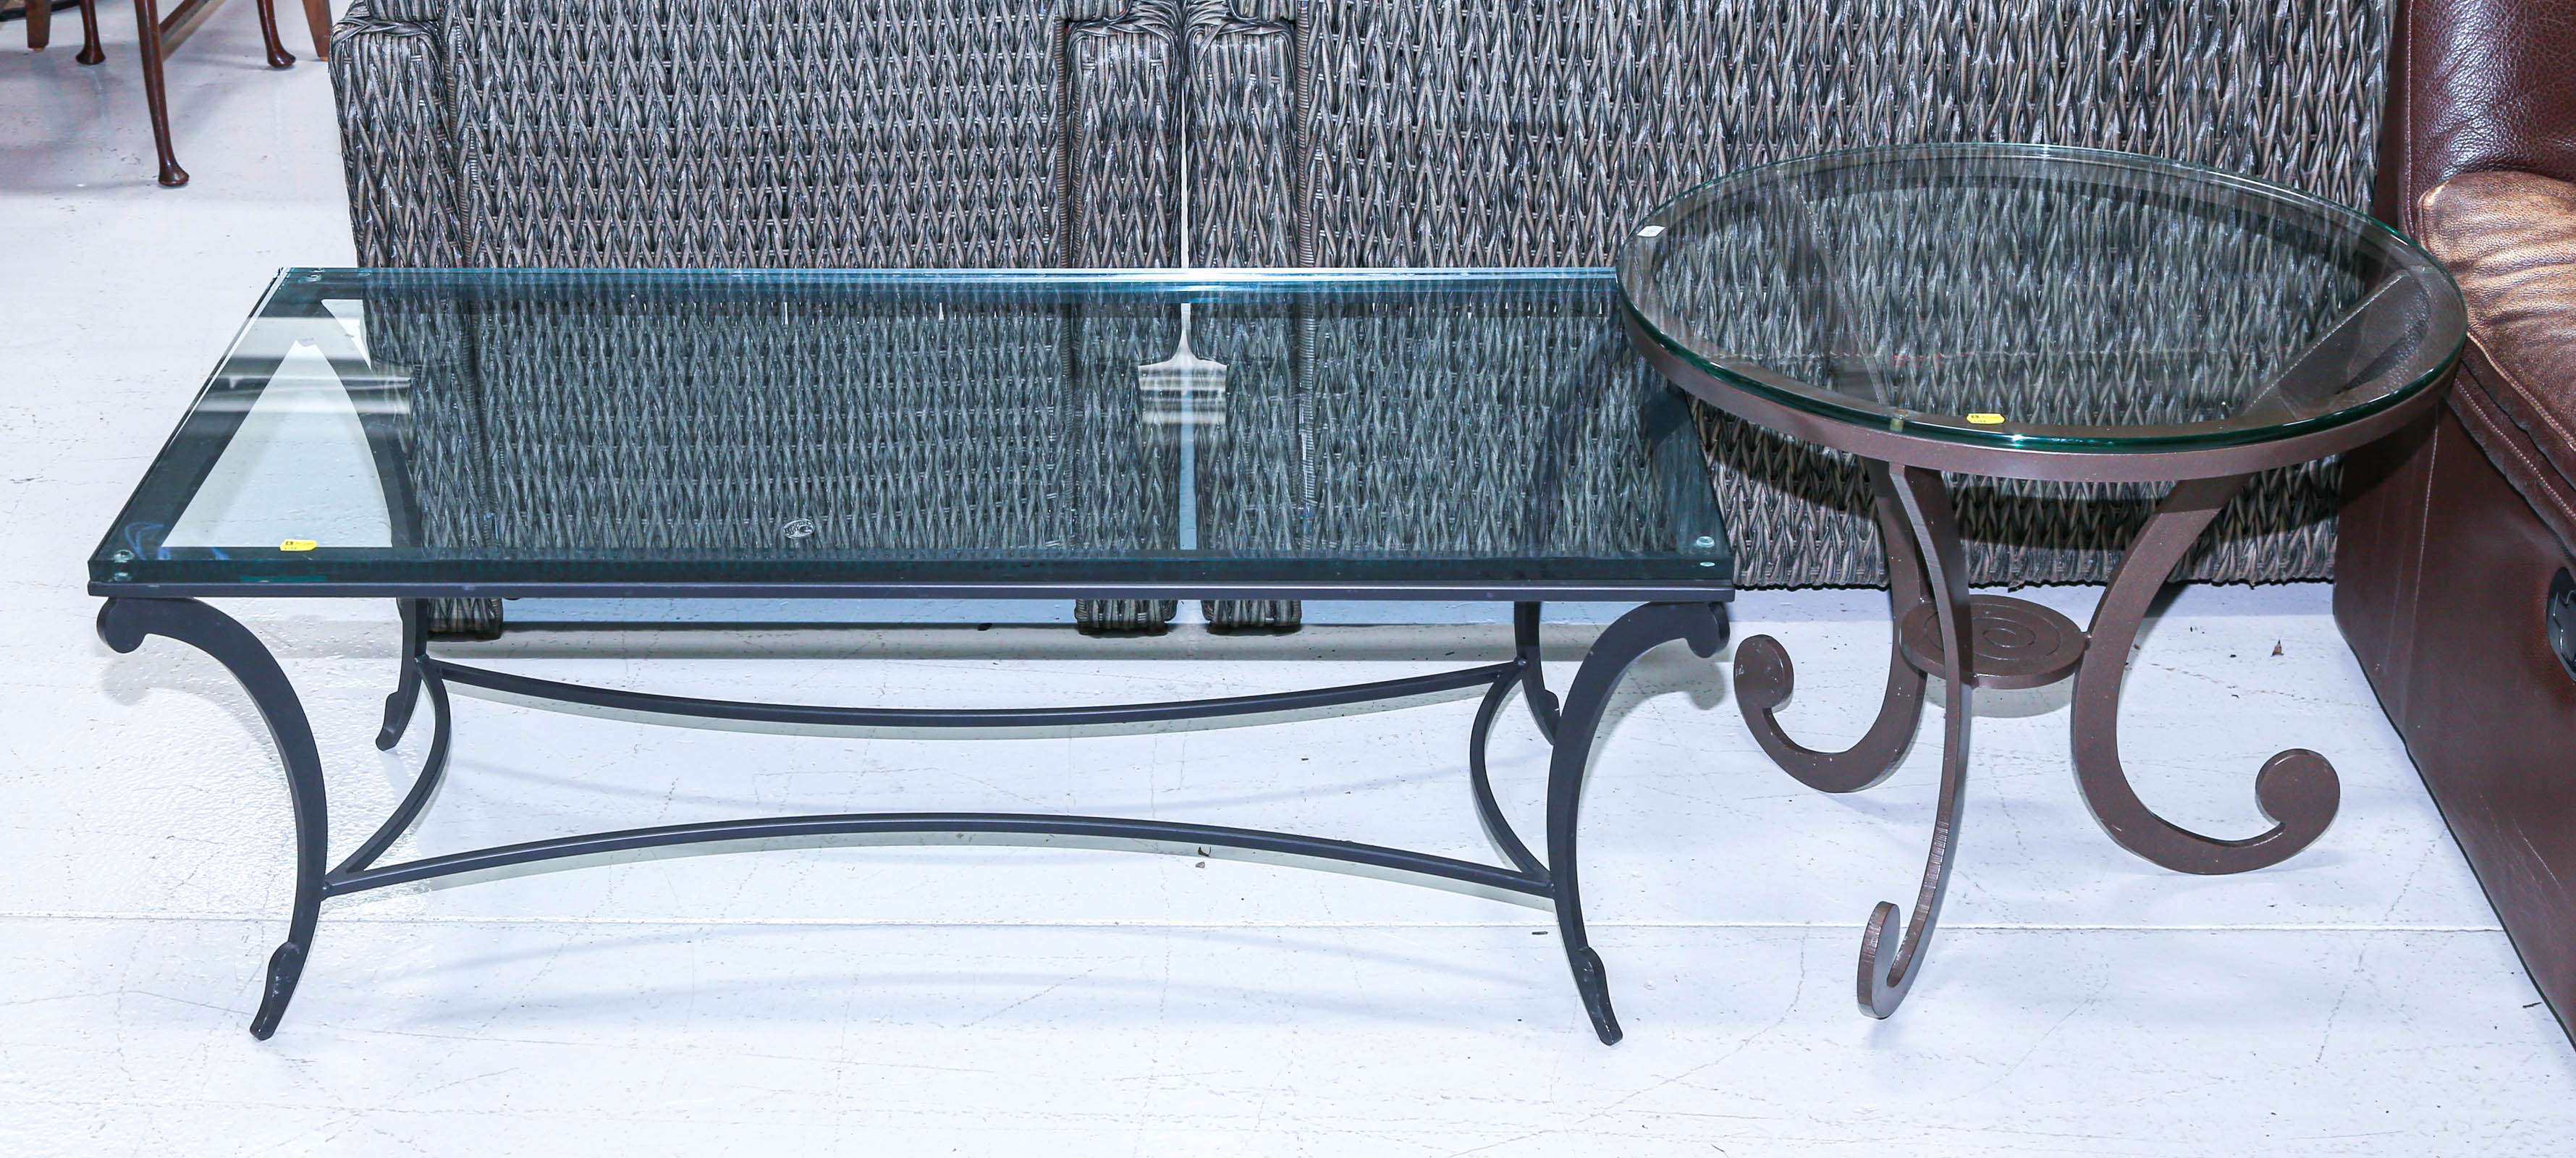 TWO METAL BASED TABLES WITH GLASS 2e8bc2